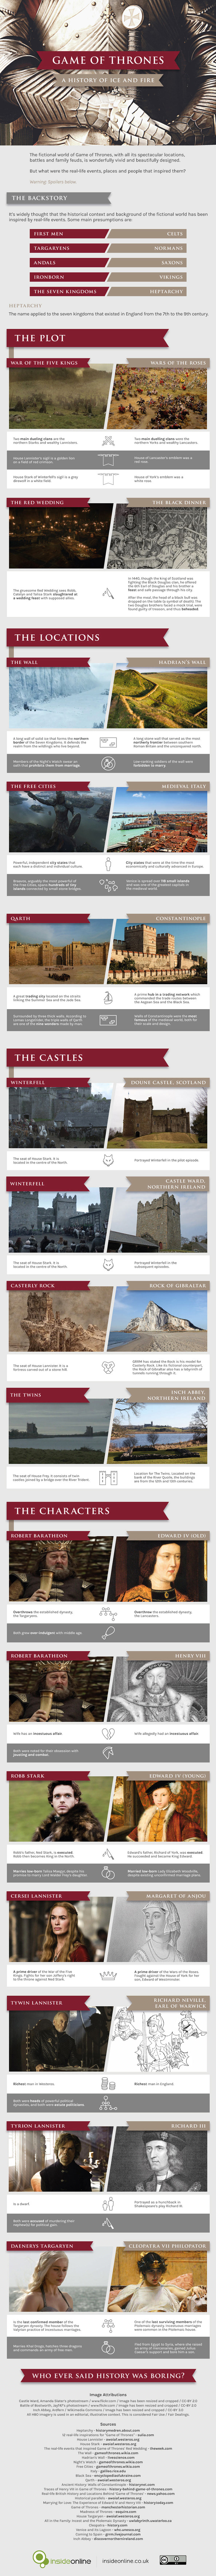 Game of Thrones History Infographic